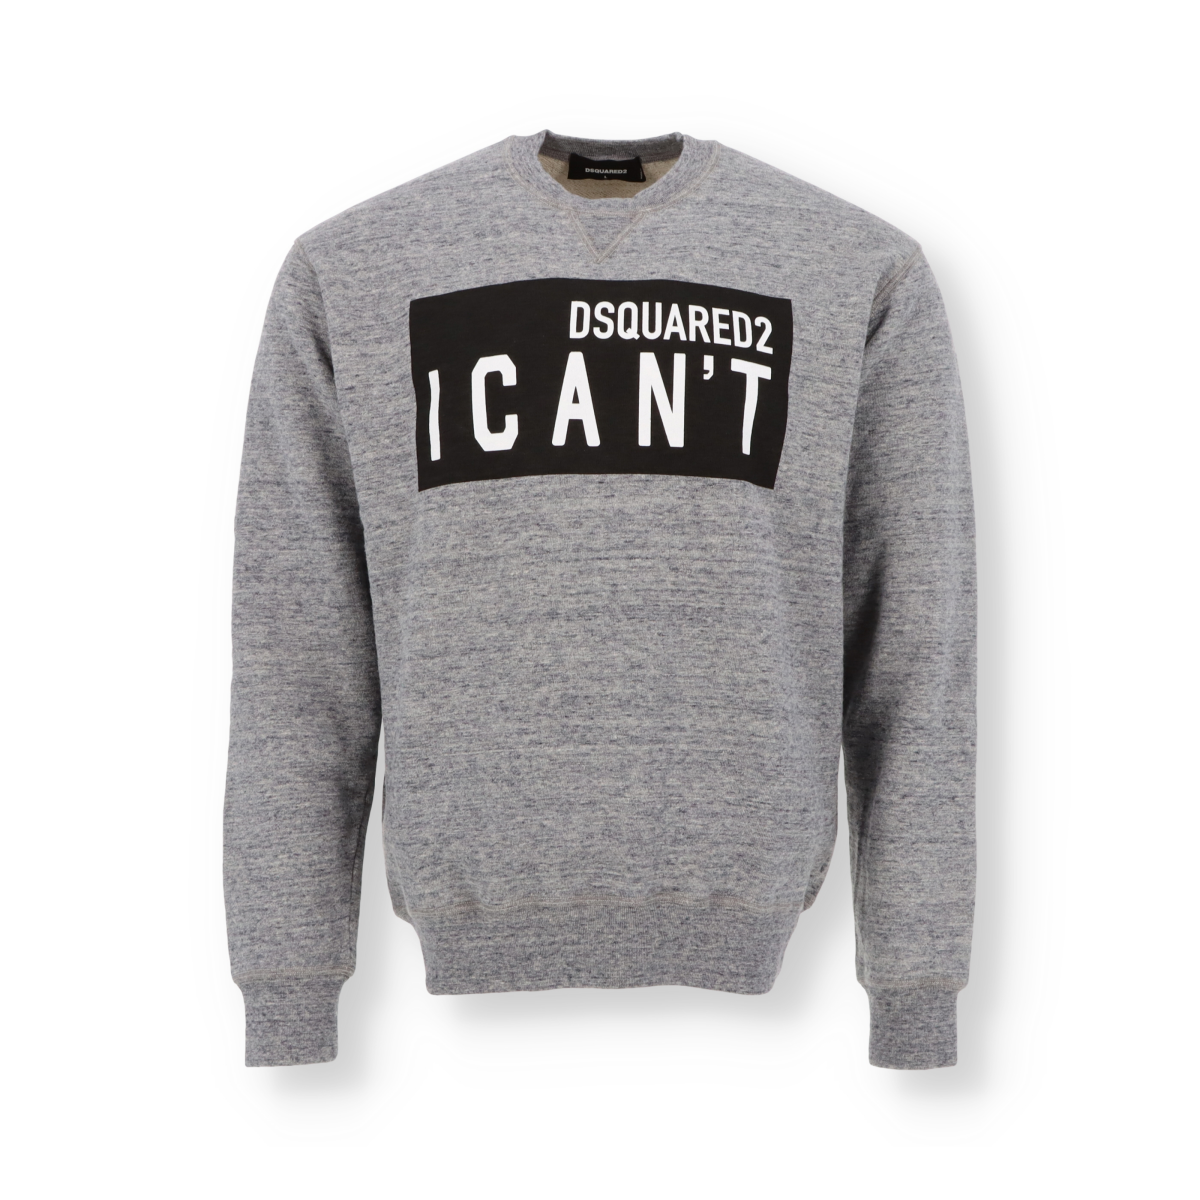 Sweat Dsquared2 I can't